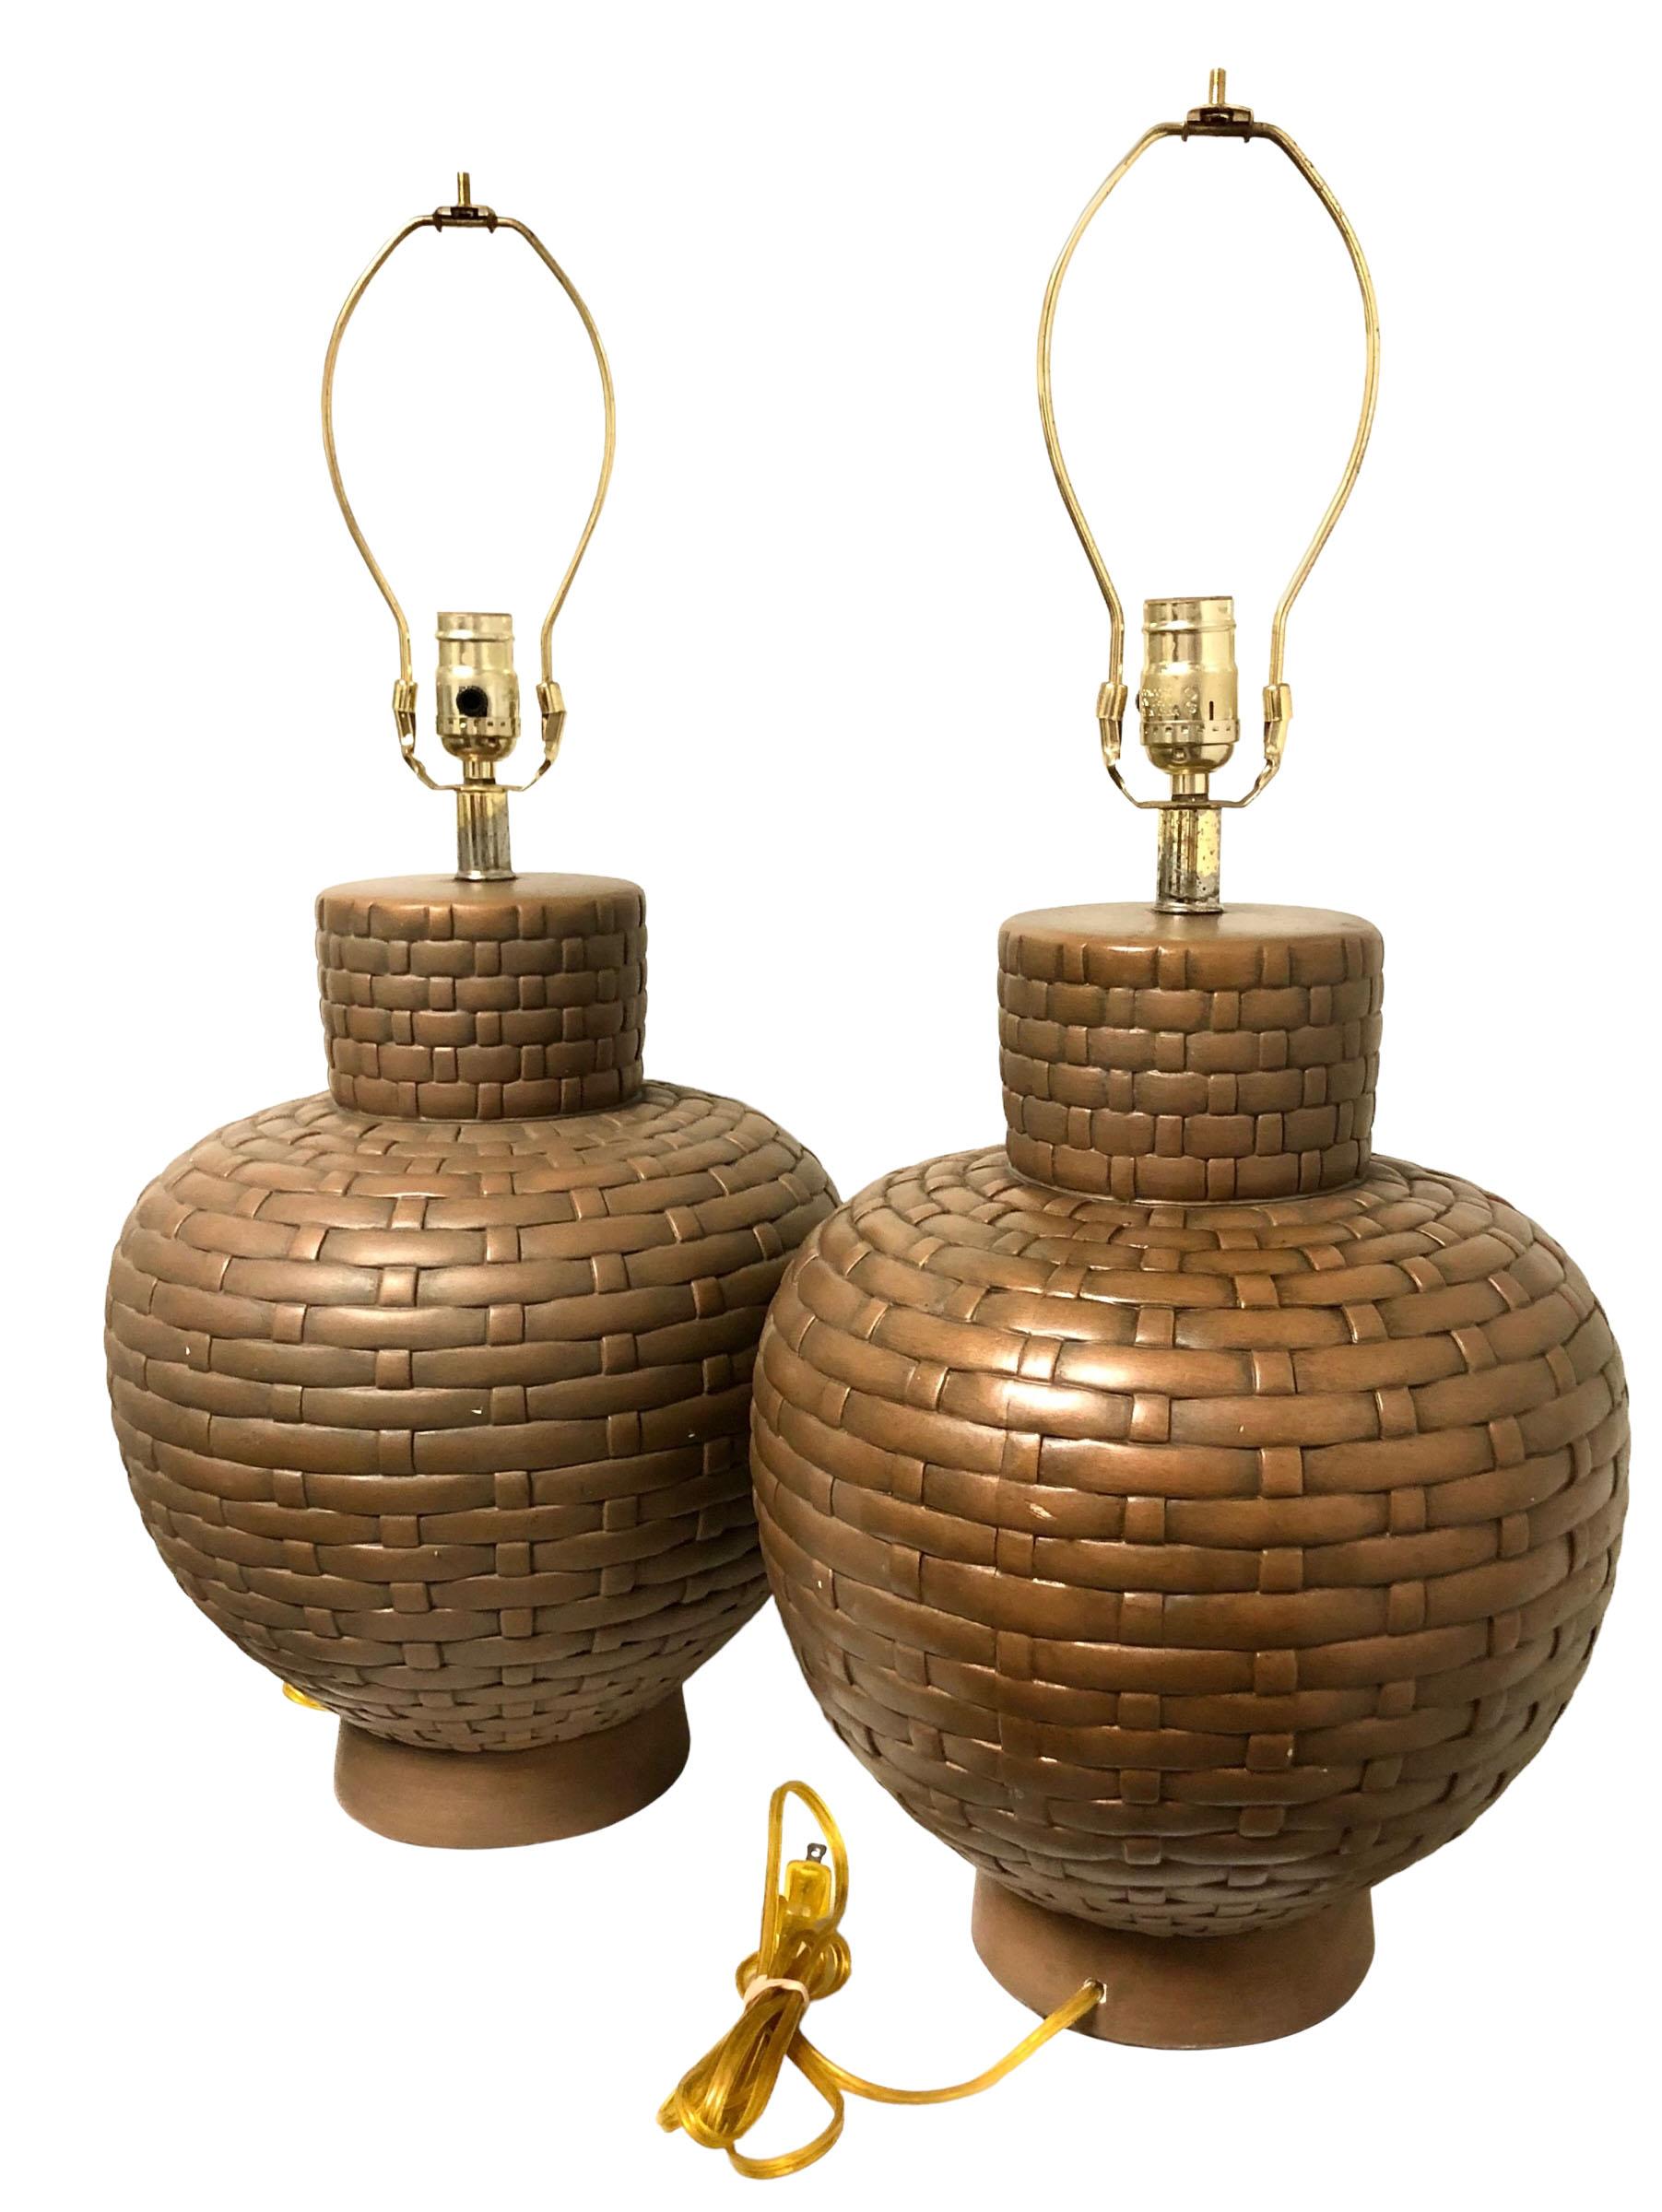 Pair of lamps mid century early 1970s maybe even mid 60s. They are made of plaster of paris, faux painted to look like they are woven. Lamps are perfect. They are in perfect working condition and have a new cord in clear gold. Finished off with felt